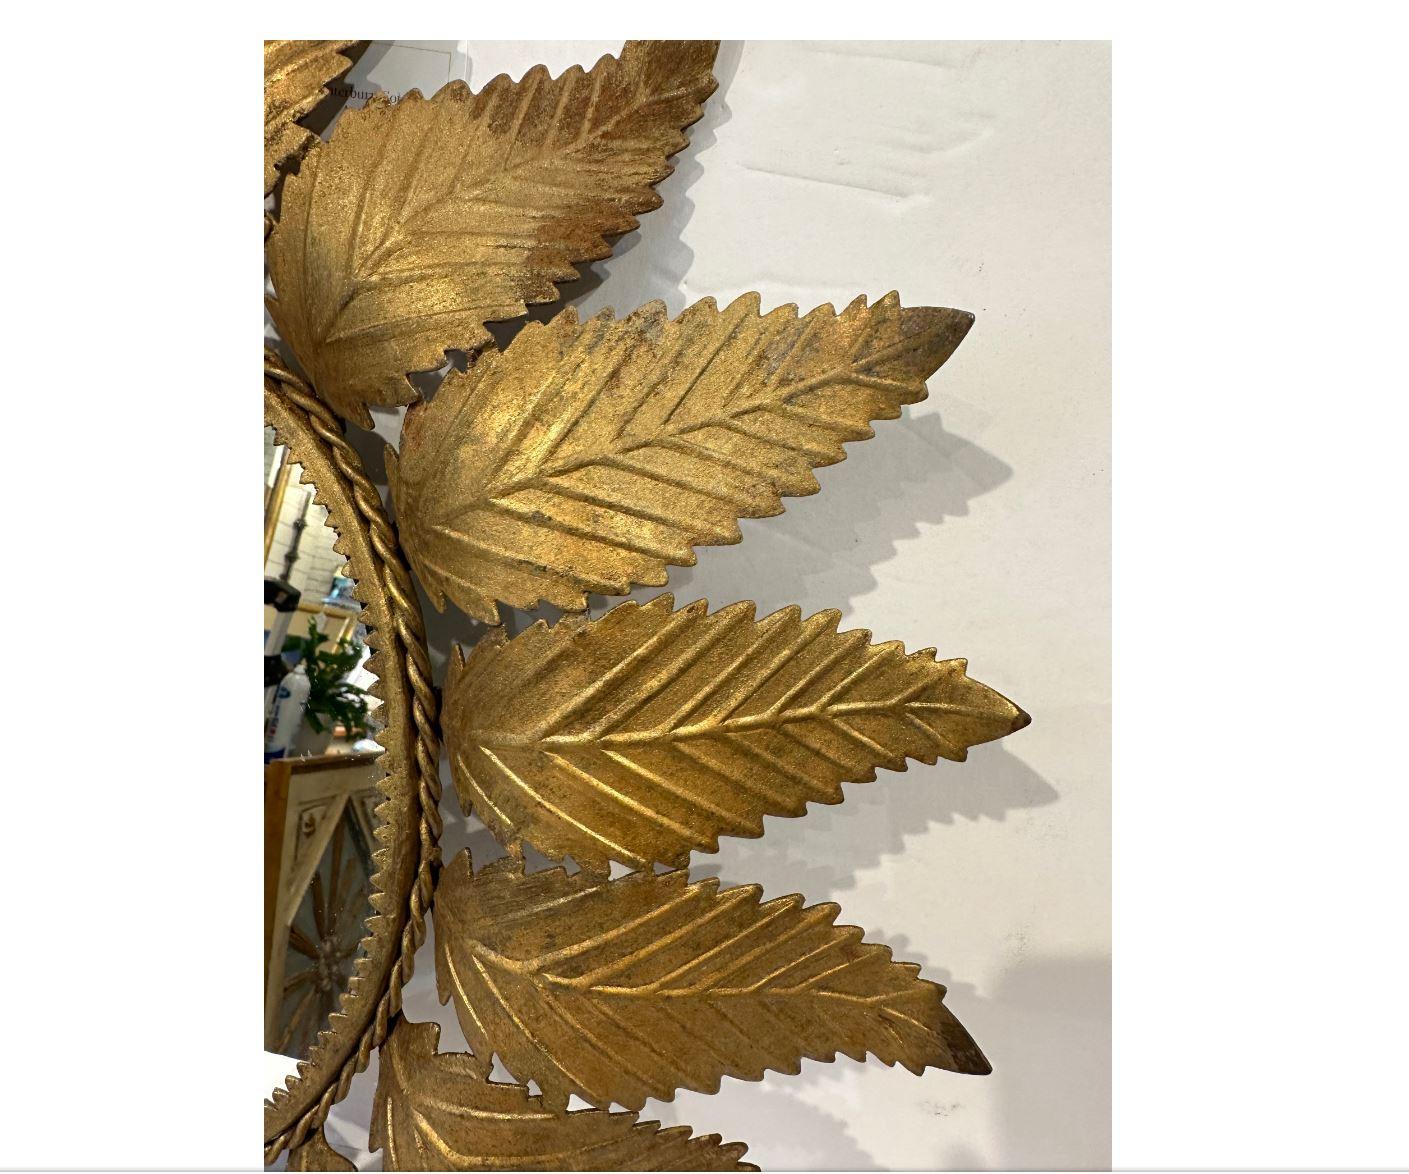 This is a beautiful 19th century Sunburst mirror! The toleware leaves have lovely intricate detail. There is a twisted gold rope border around the circumference of the mirror combined with a symmetrical triangle border as well. The delicate floral